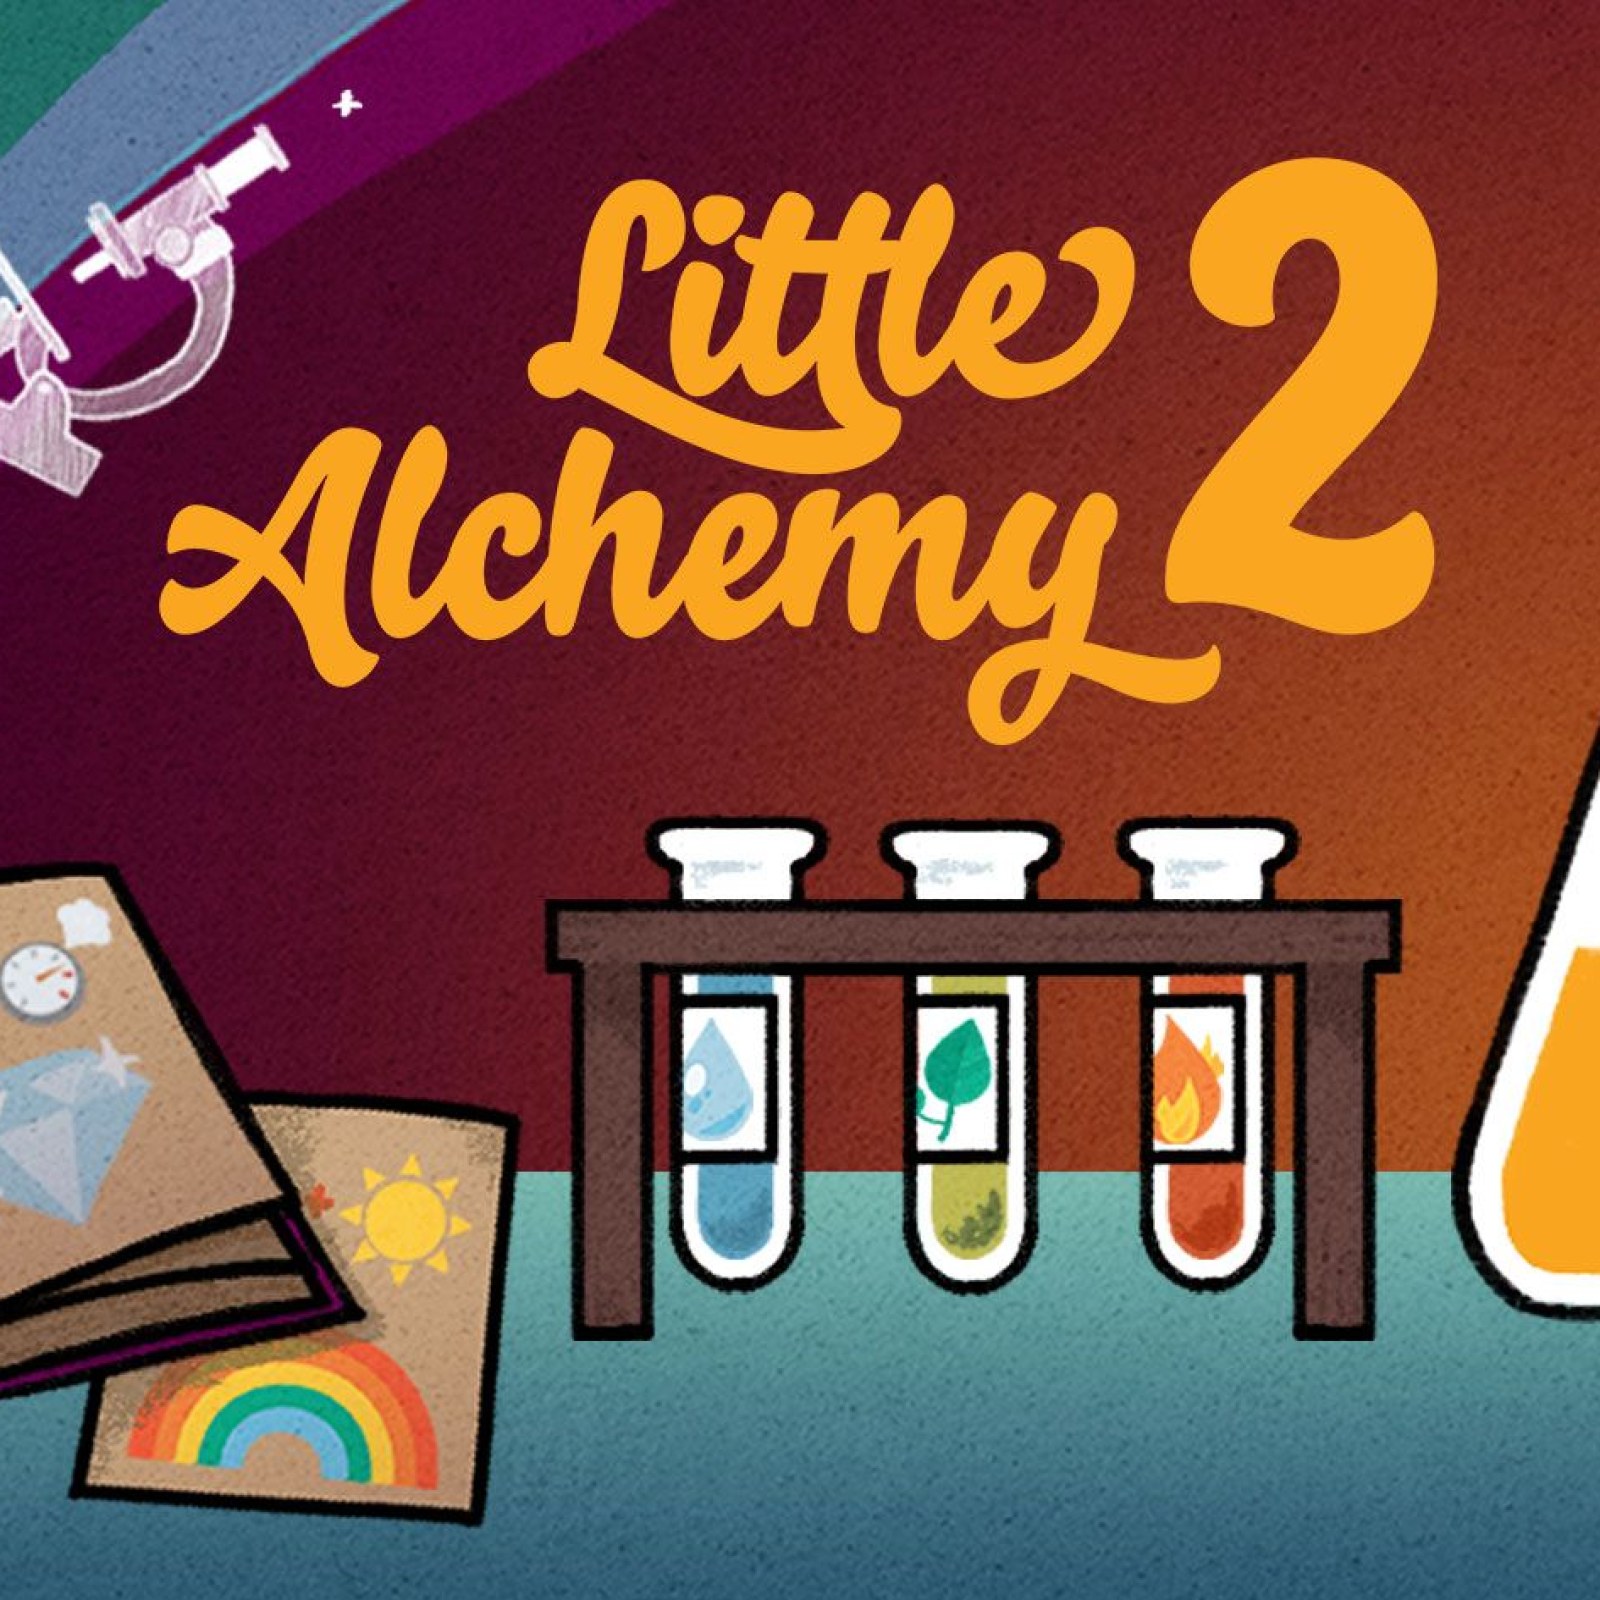 Little Alchemy 2' Update Cheats & Hints: How to Make New Item in